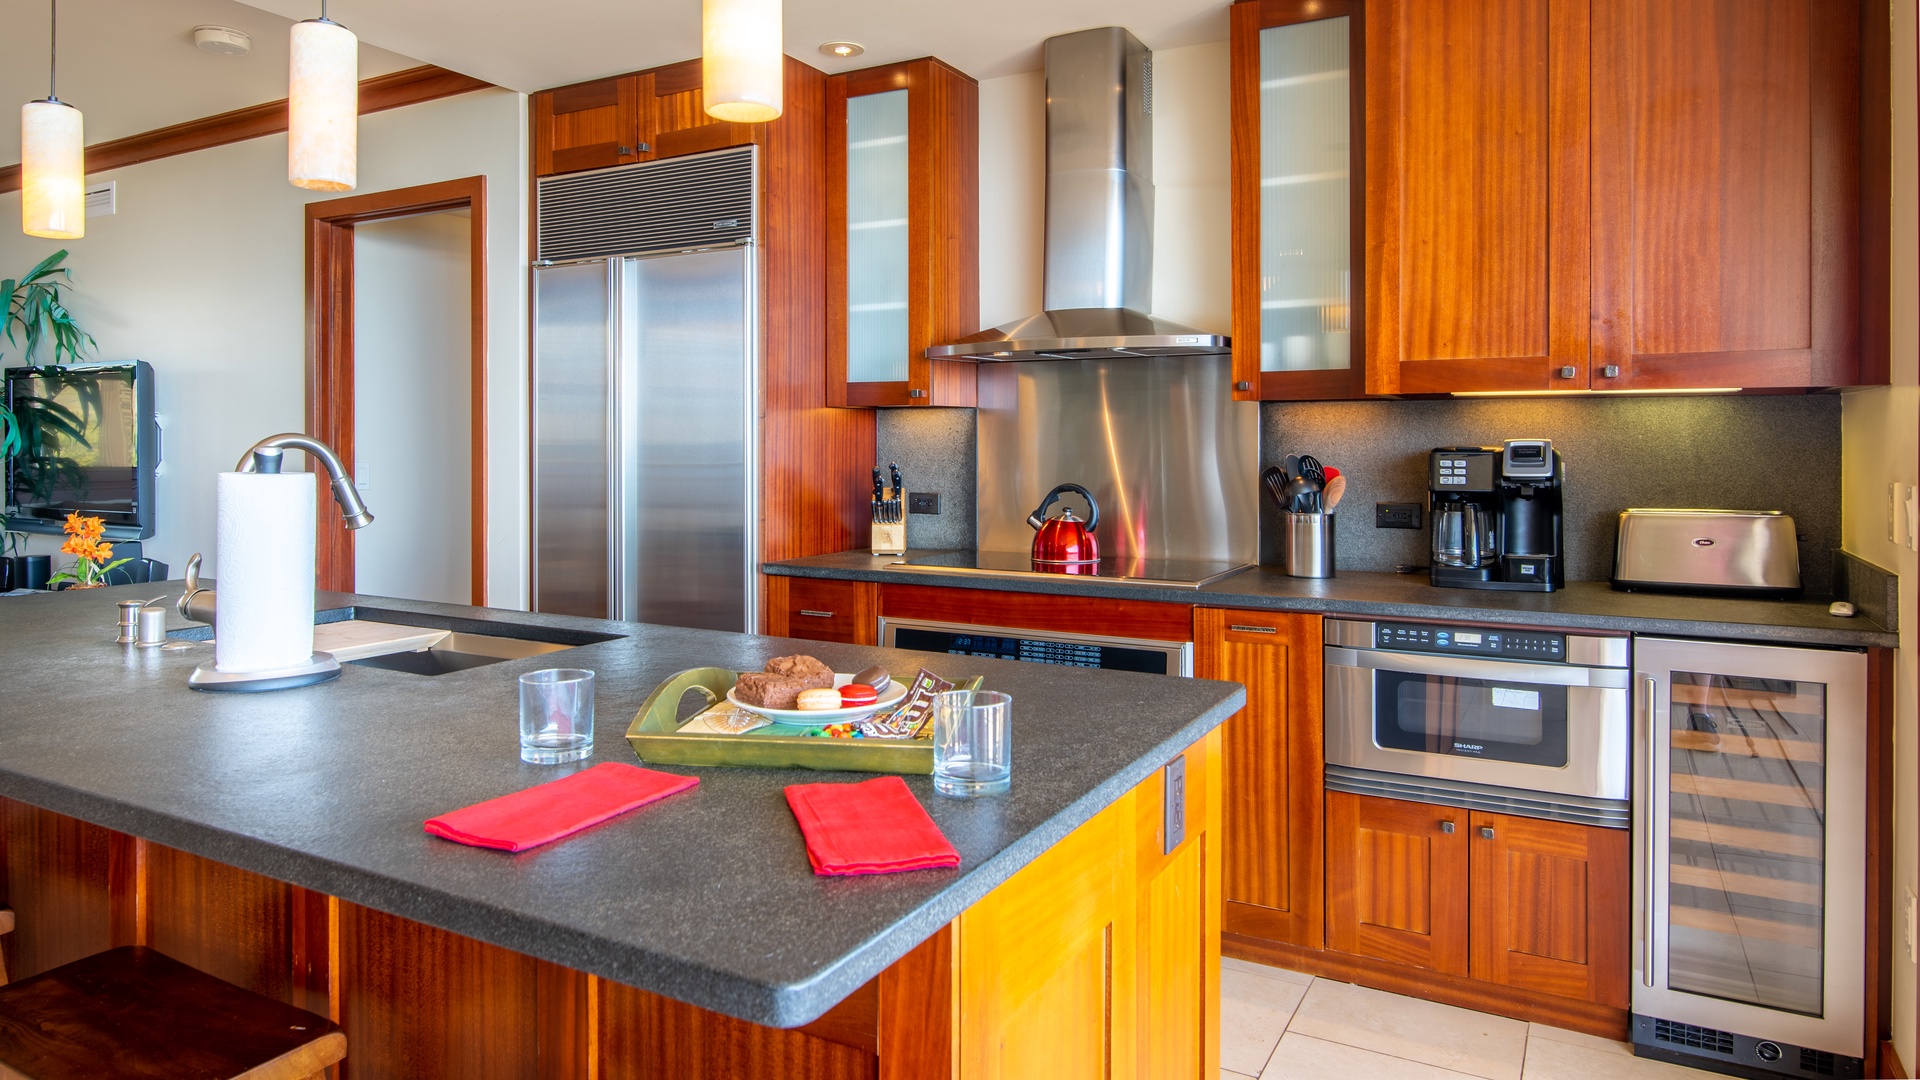 Kapolei Vacation Rentals, Ko Olina Beach Villas B901 - The fully equipped kitchen with stainless steel appliances.